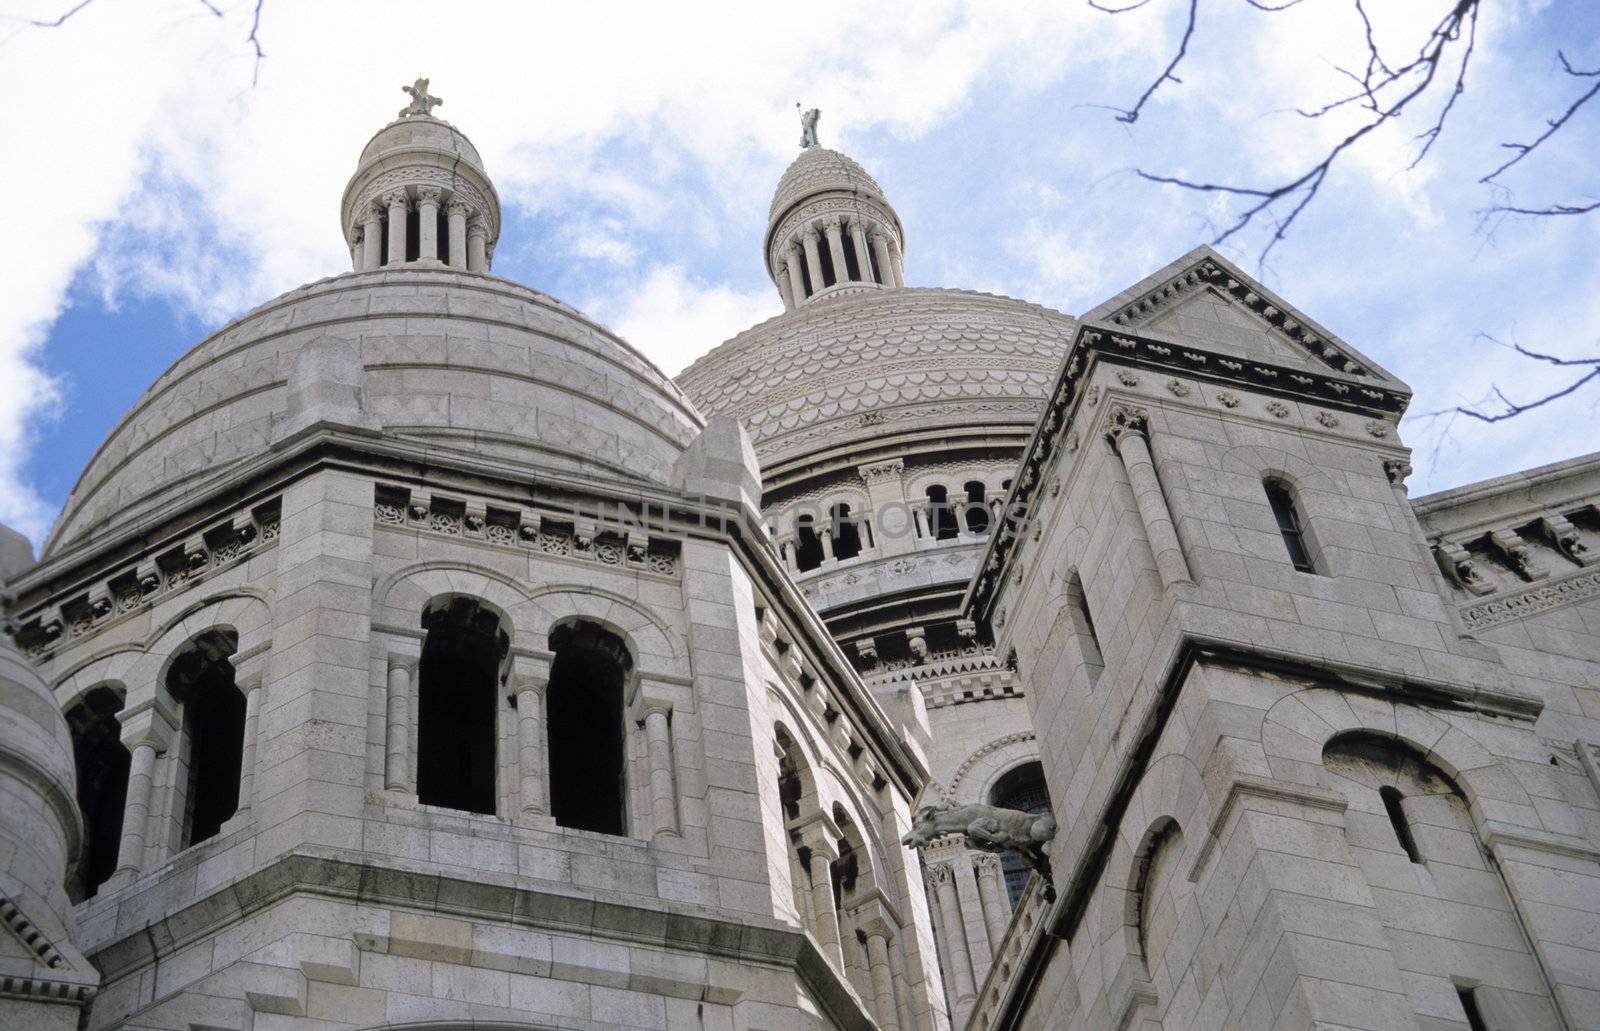 View of the famous Sacre Coeur church in Paris, France. 